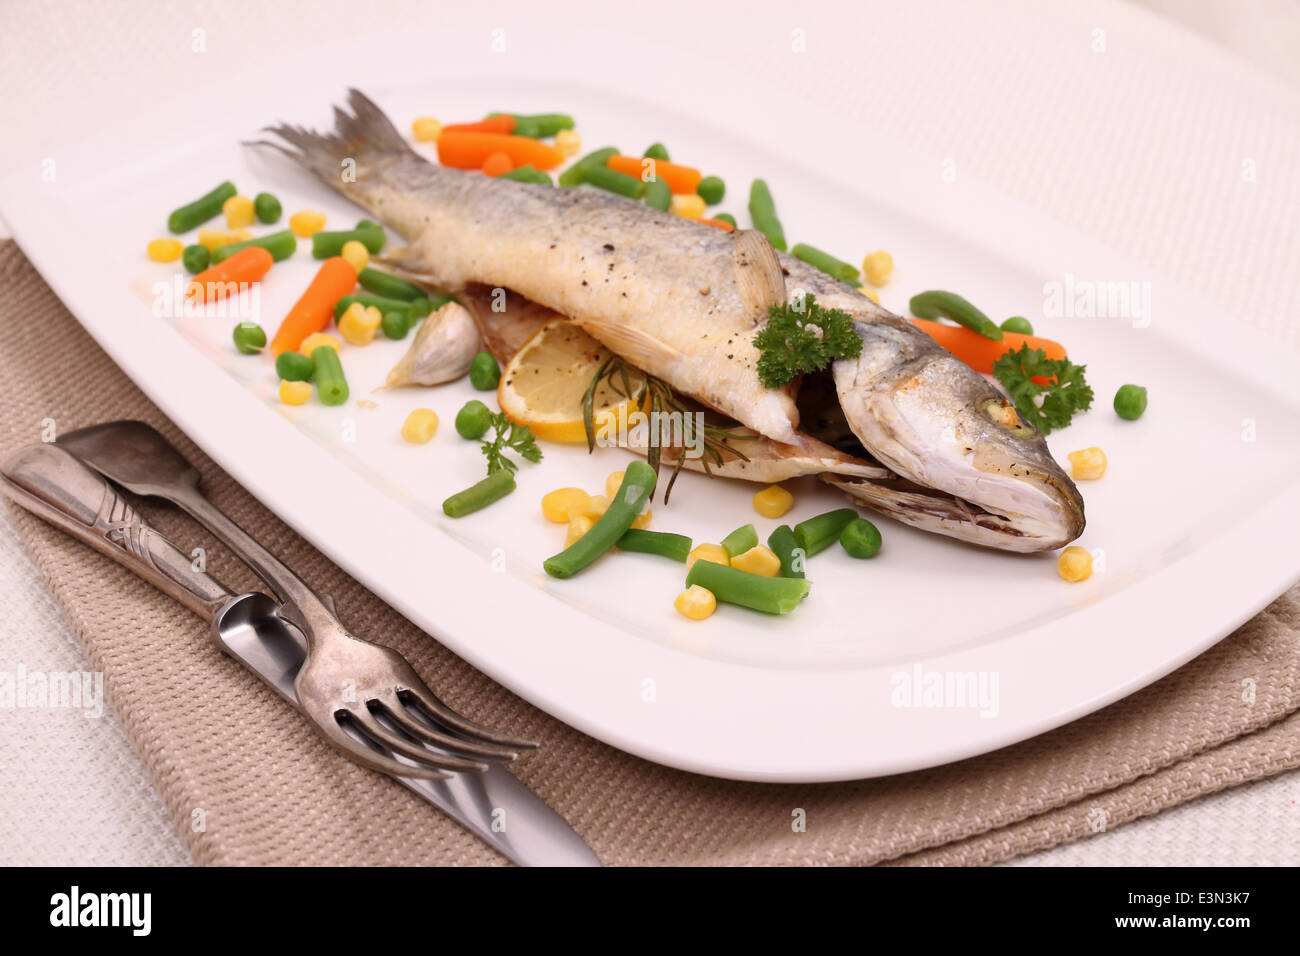 Fried whole sea bass, vegetables and lemon, close up Stock Photo